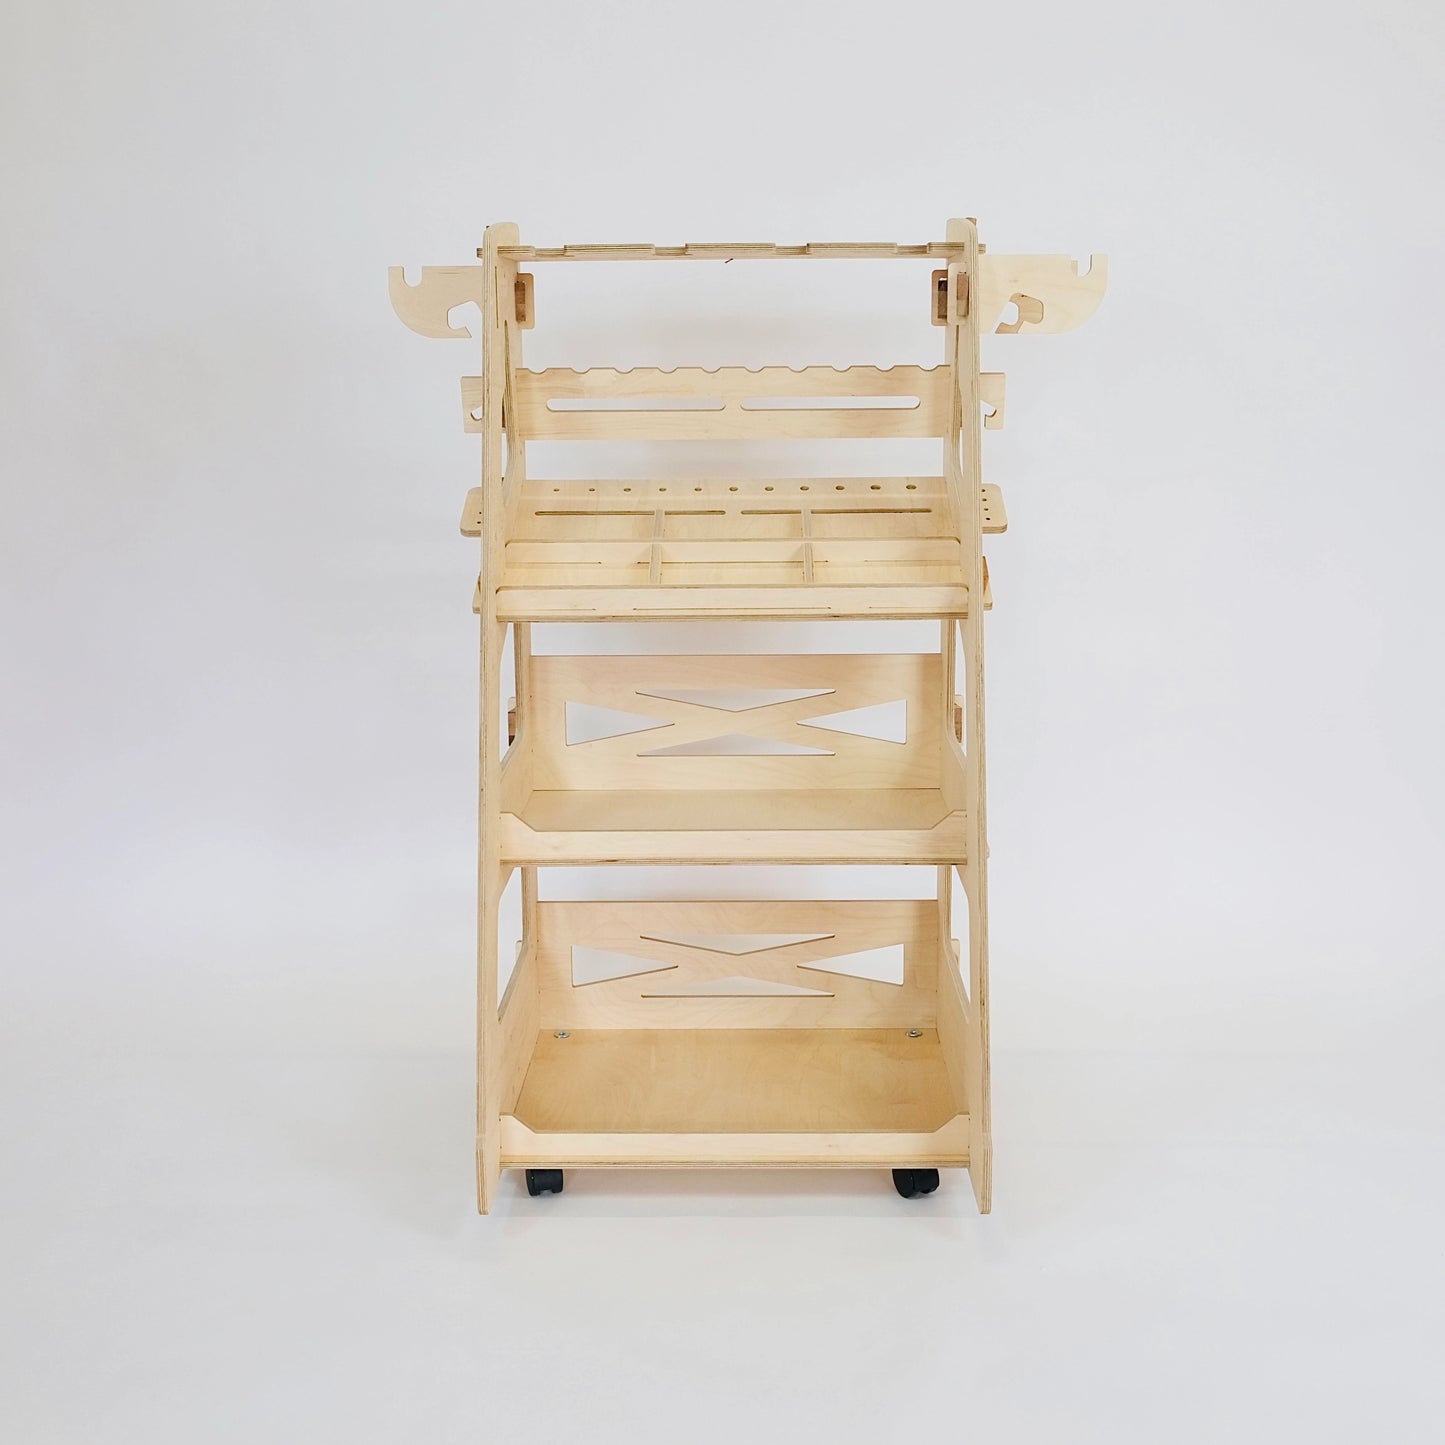 Front facing birch plywood tall tool trolley with 3 shelving trays, tool holding slots, 4 castors against a white background.